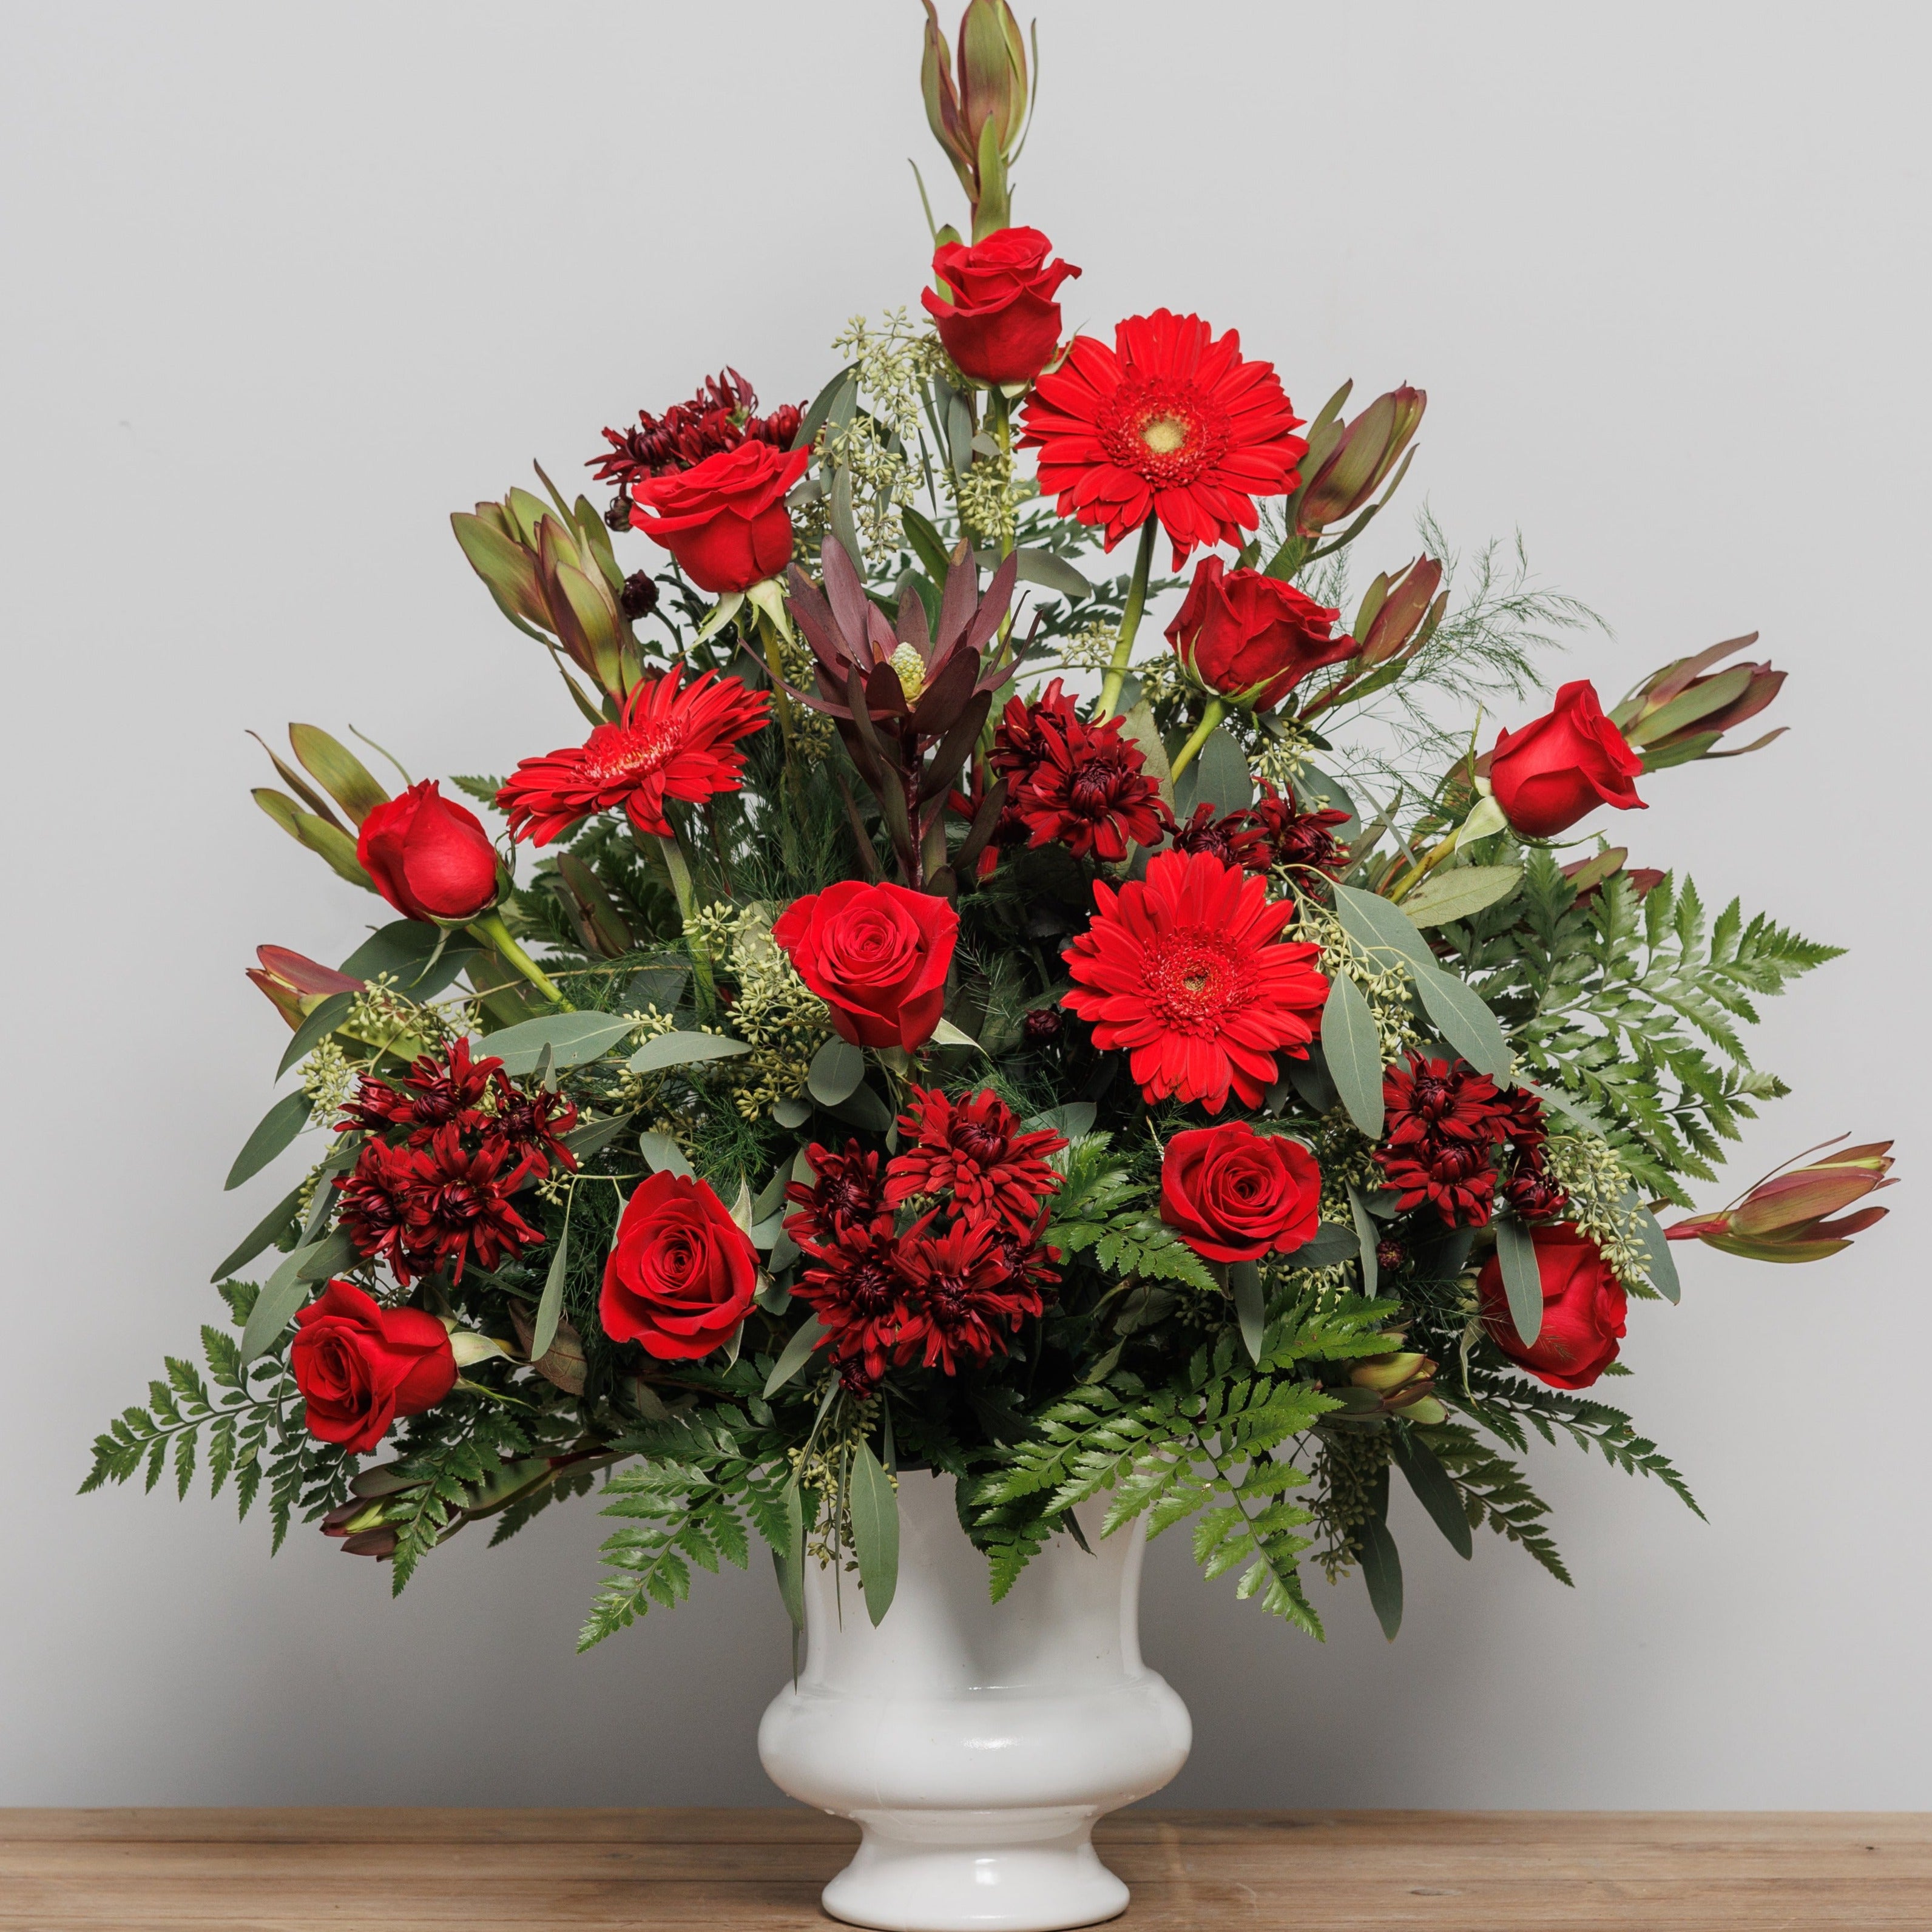 An urn arrangement with red roses and safari sunset.